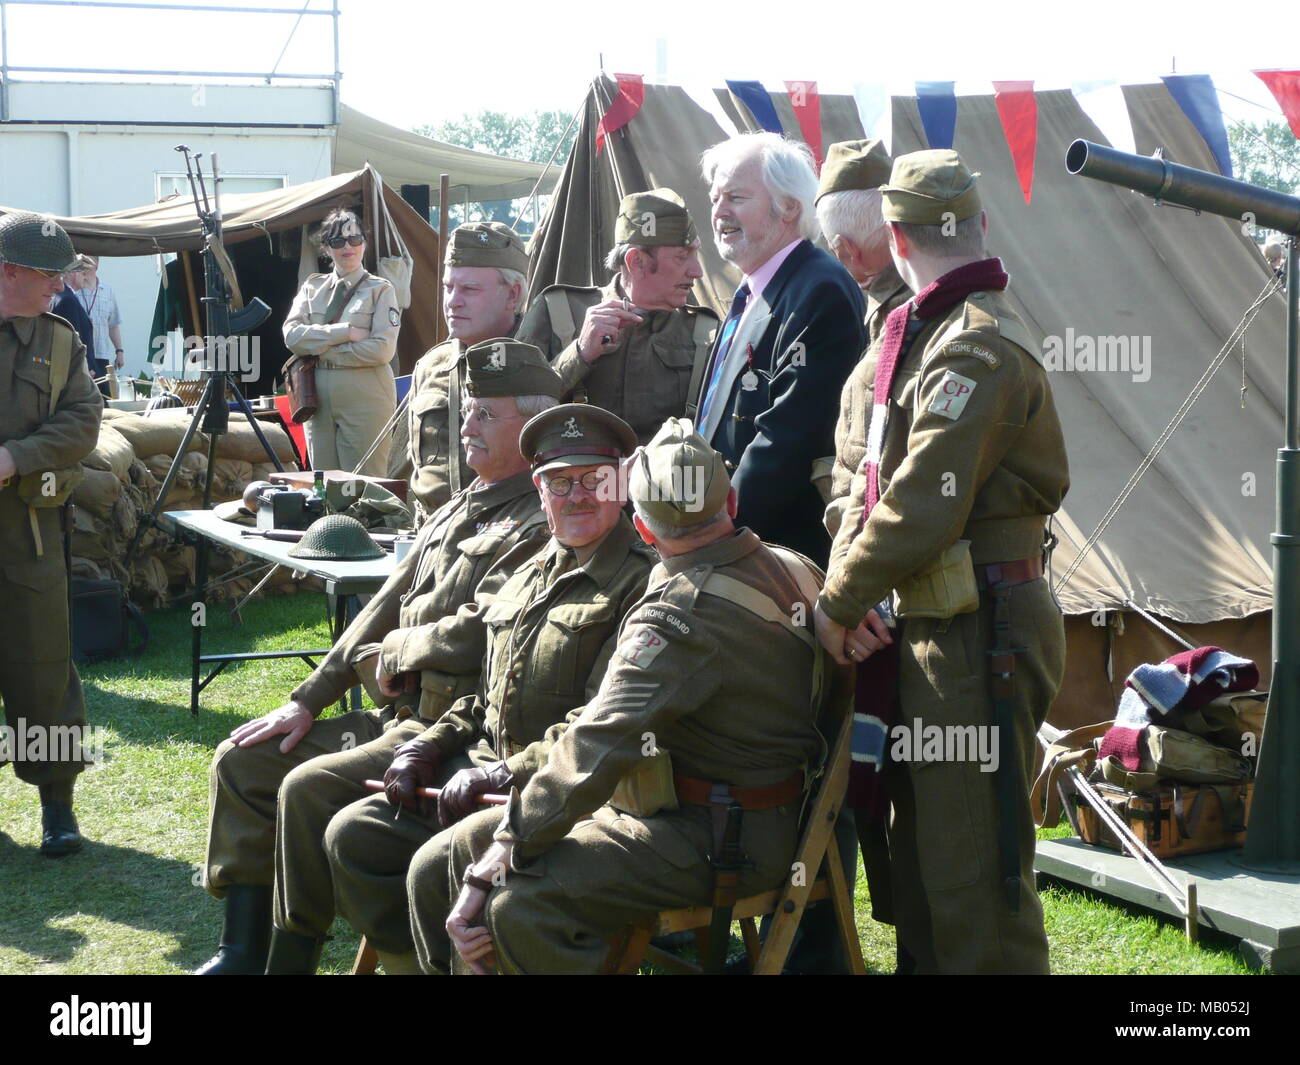 Ian Lavender best known for his role as Private Pike in the BBC comedy series Dad's Army has  fun posing  with actors at the 2009 Goodwood Revival. Stock Photo